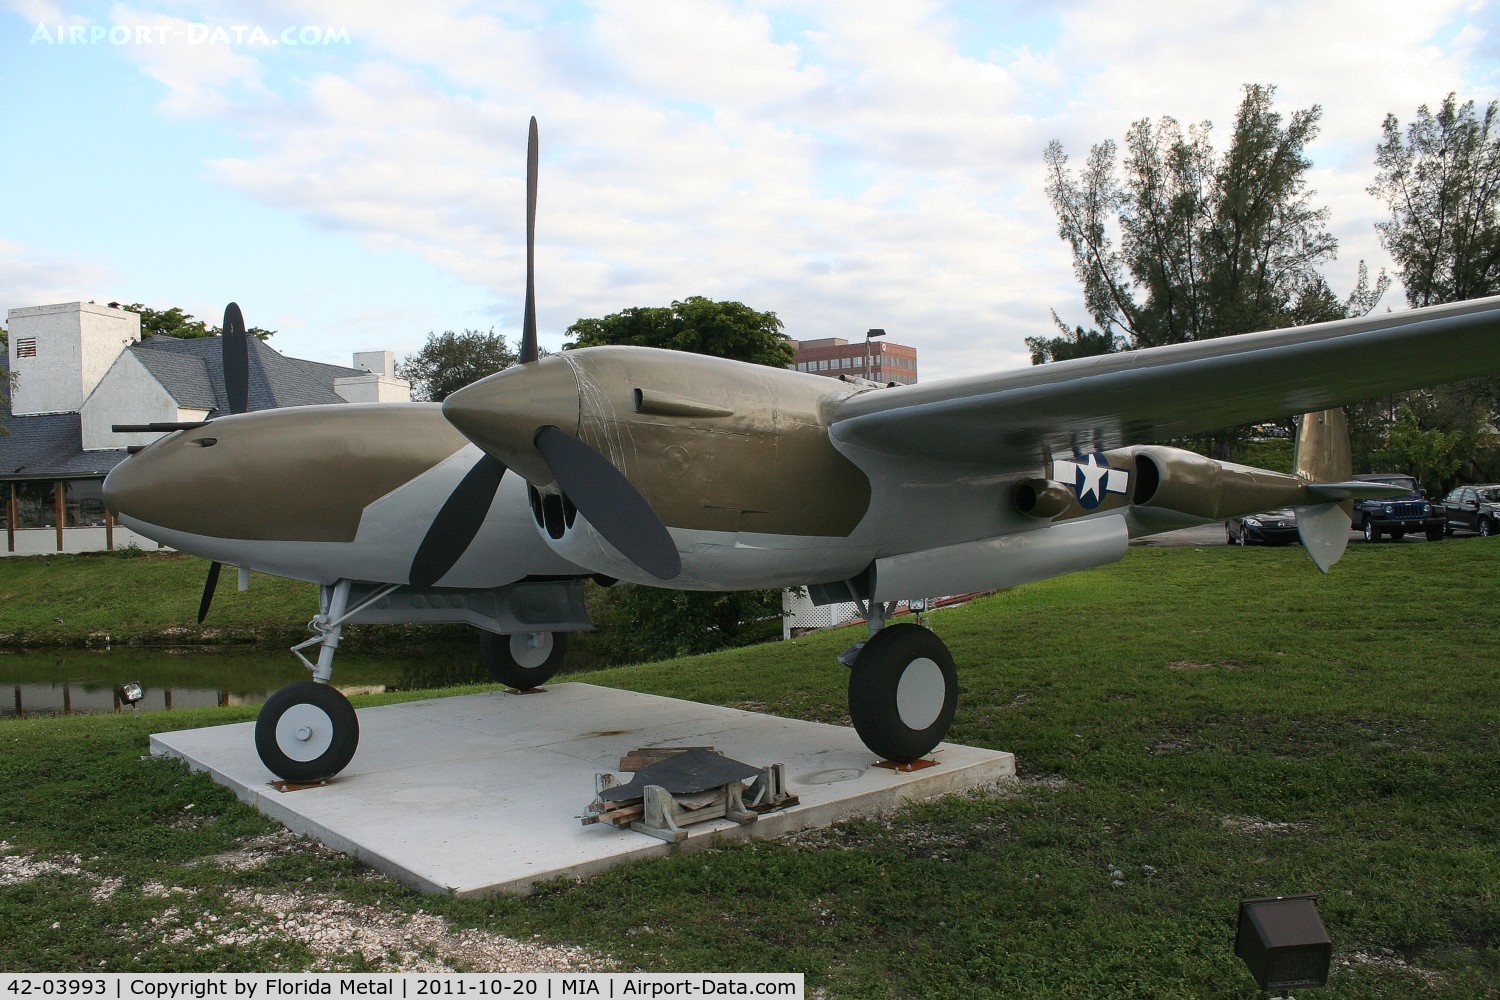 42-03993, Lockheed P-38 Lightning Replica C/N None, Does anyone have any info on this plane in front of the 94th Aerosquadron Restaurant by Miami Int. Airport?